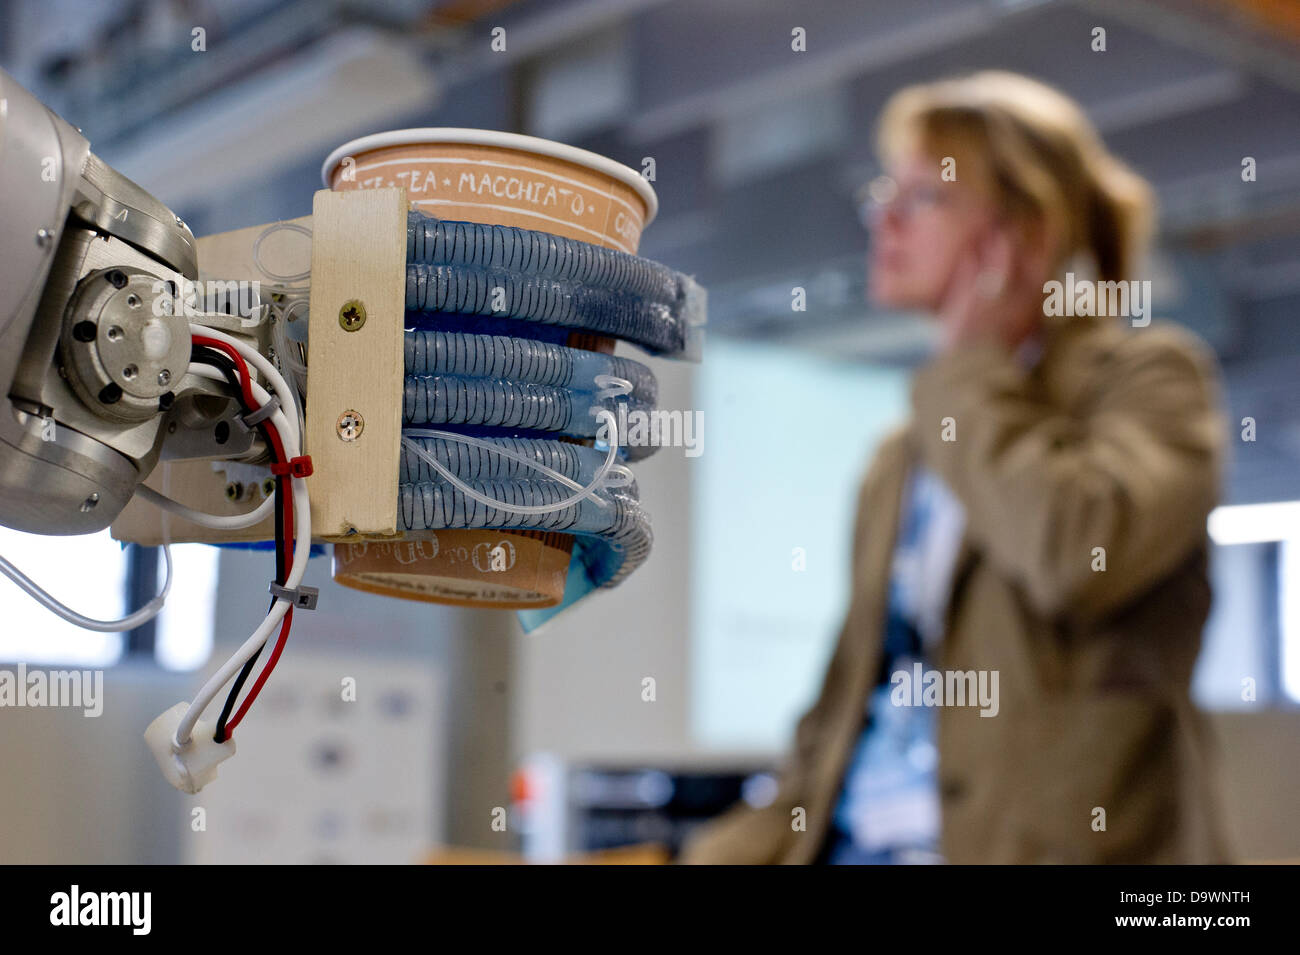 Robot 'Meka' manufactured by 'Meka Robotics' holds a cup of coffee at the Technische Universitaet (TU) in Berlin, Germany, 27 June 2013. The 'Softhands' or 'RBO Hand' have been developed by the Robotics and Biology (RBO) Laboratory of the TU Berlin. Photo: Nicolas Armer Stock Photo